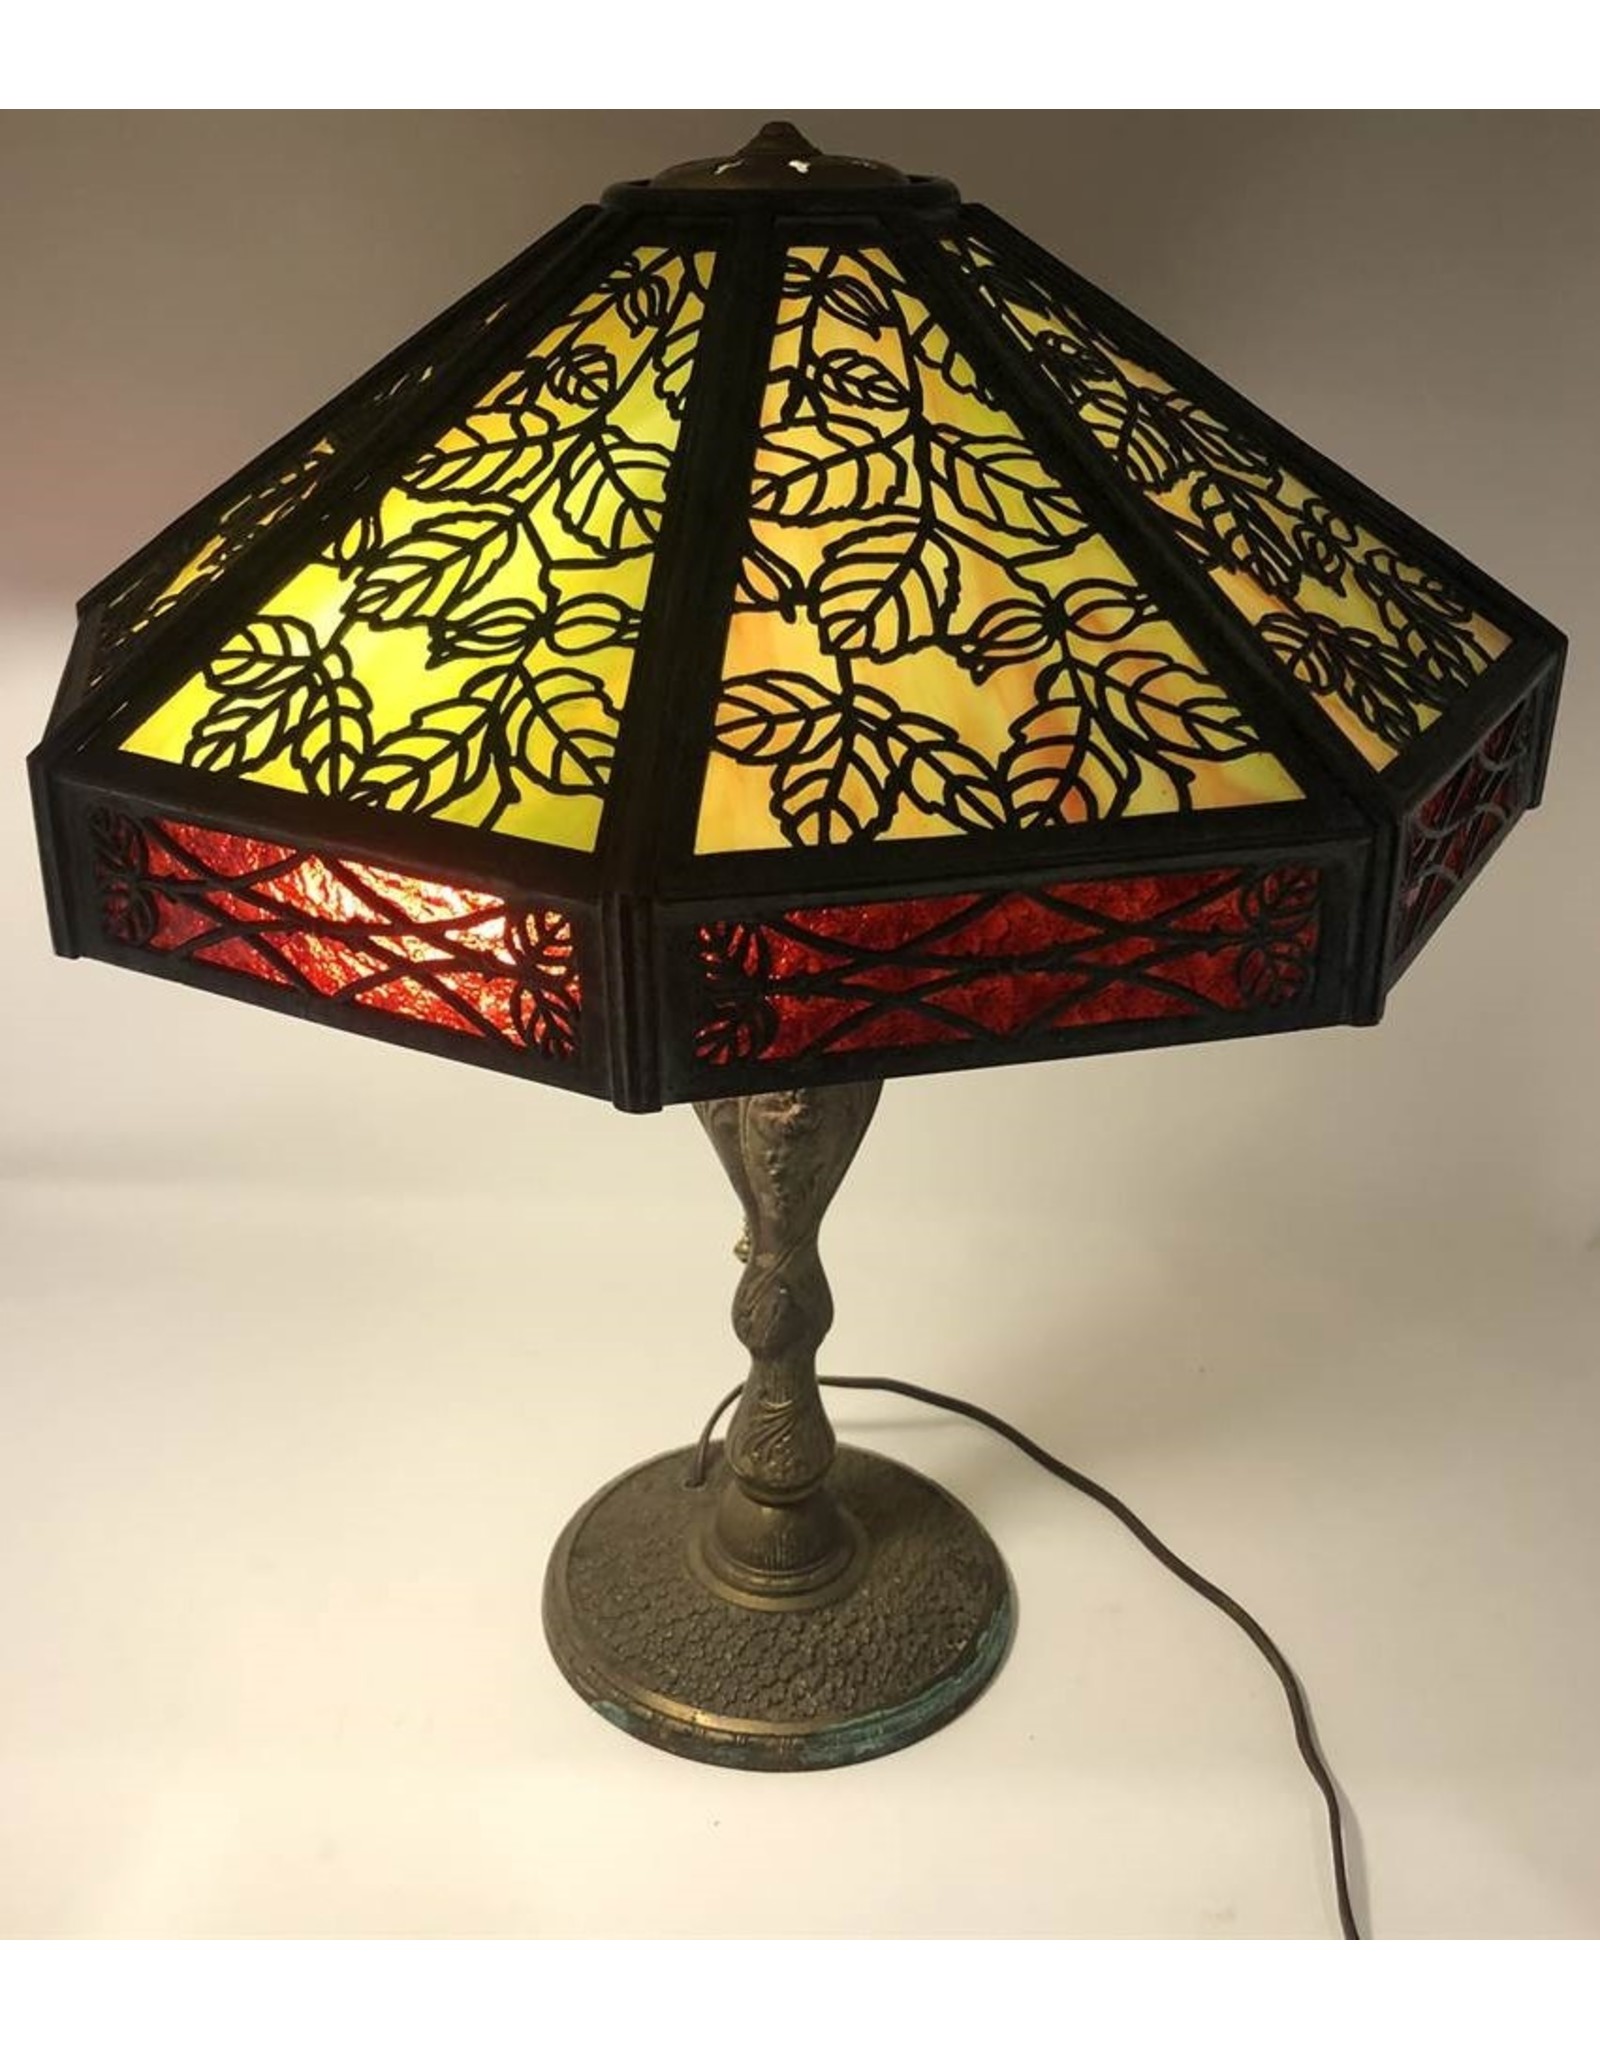 Table lamp - antique slag glass brass base and shade